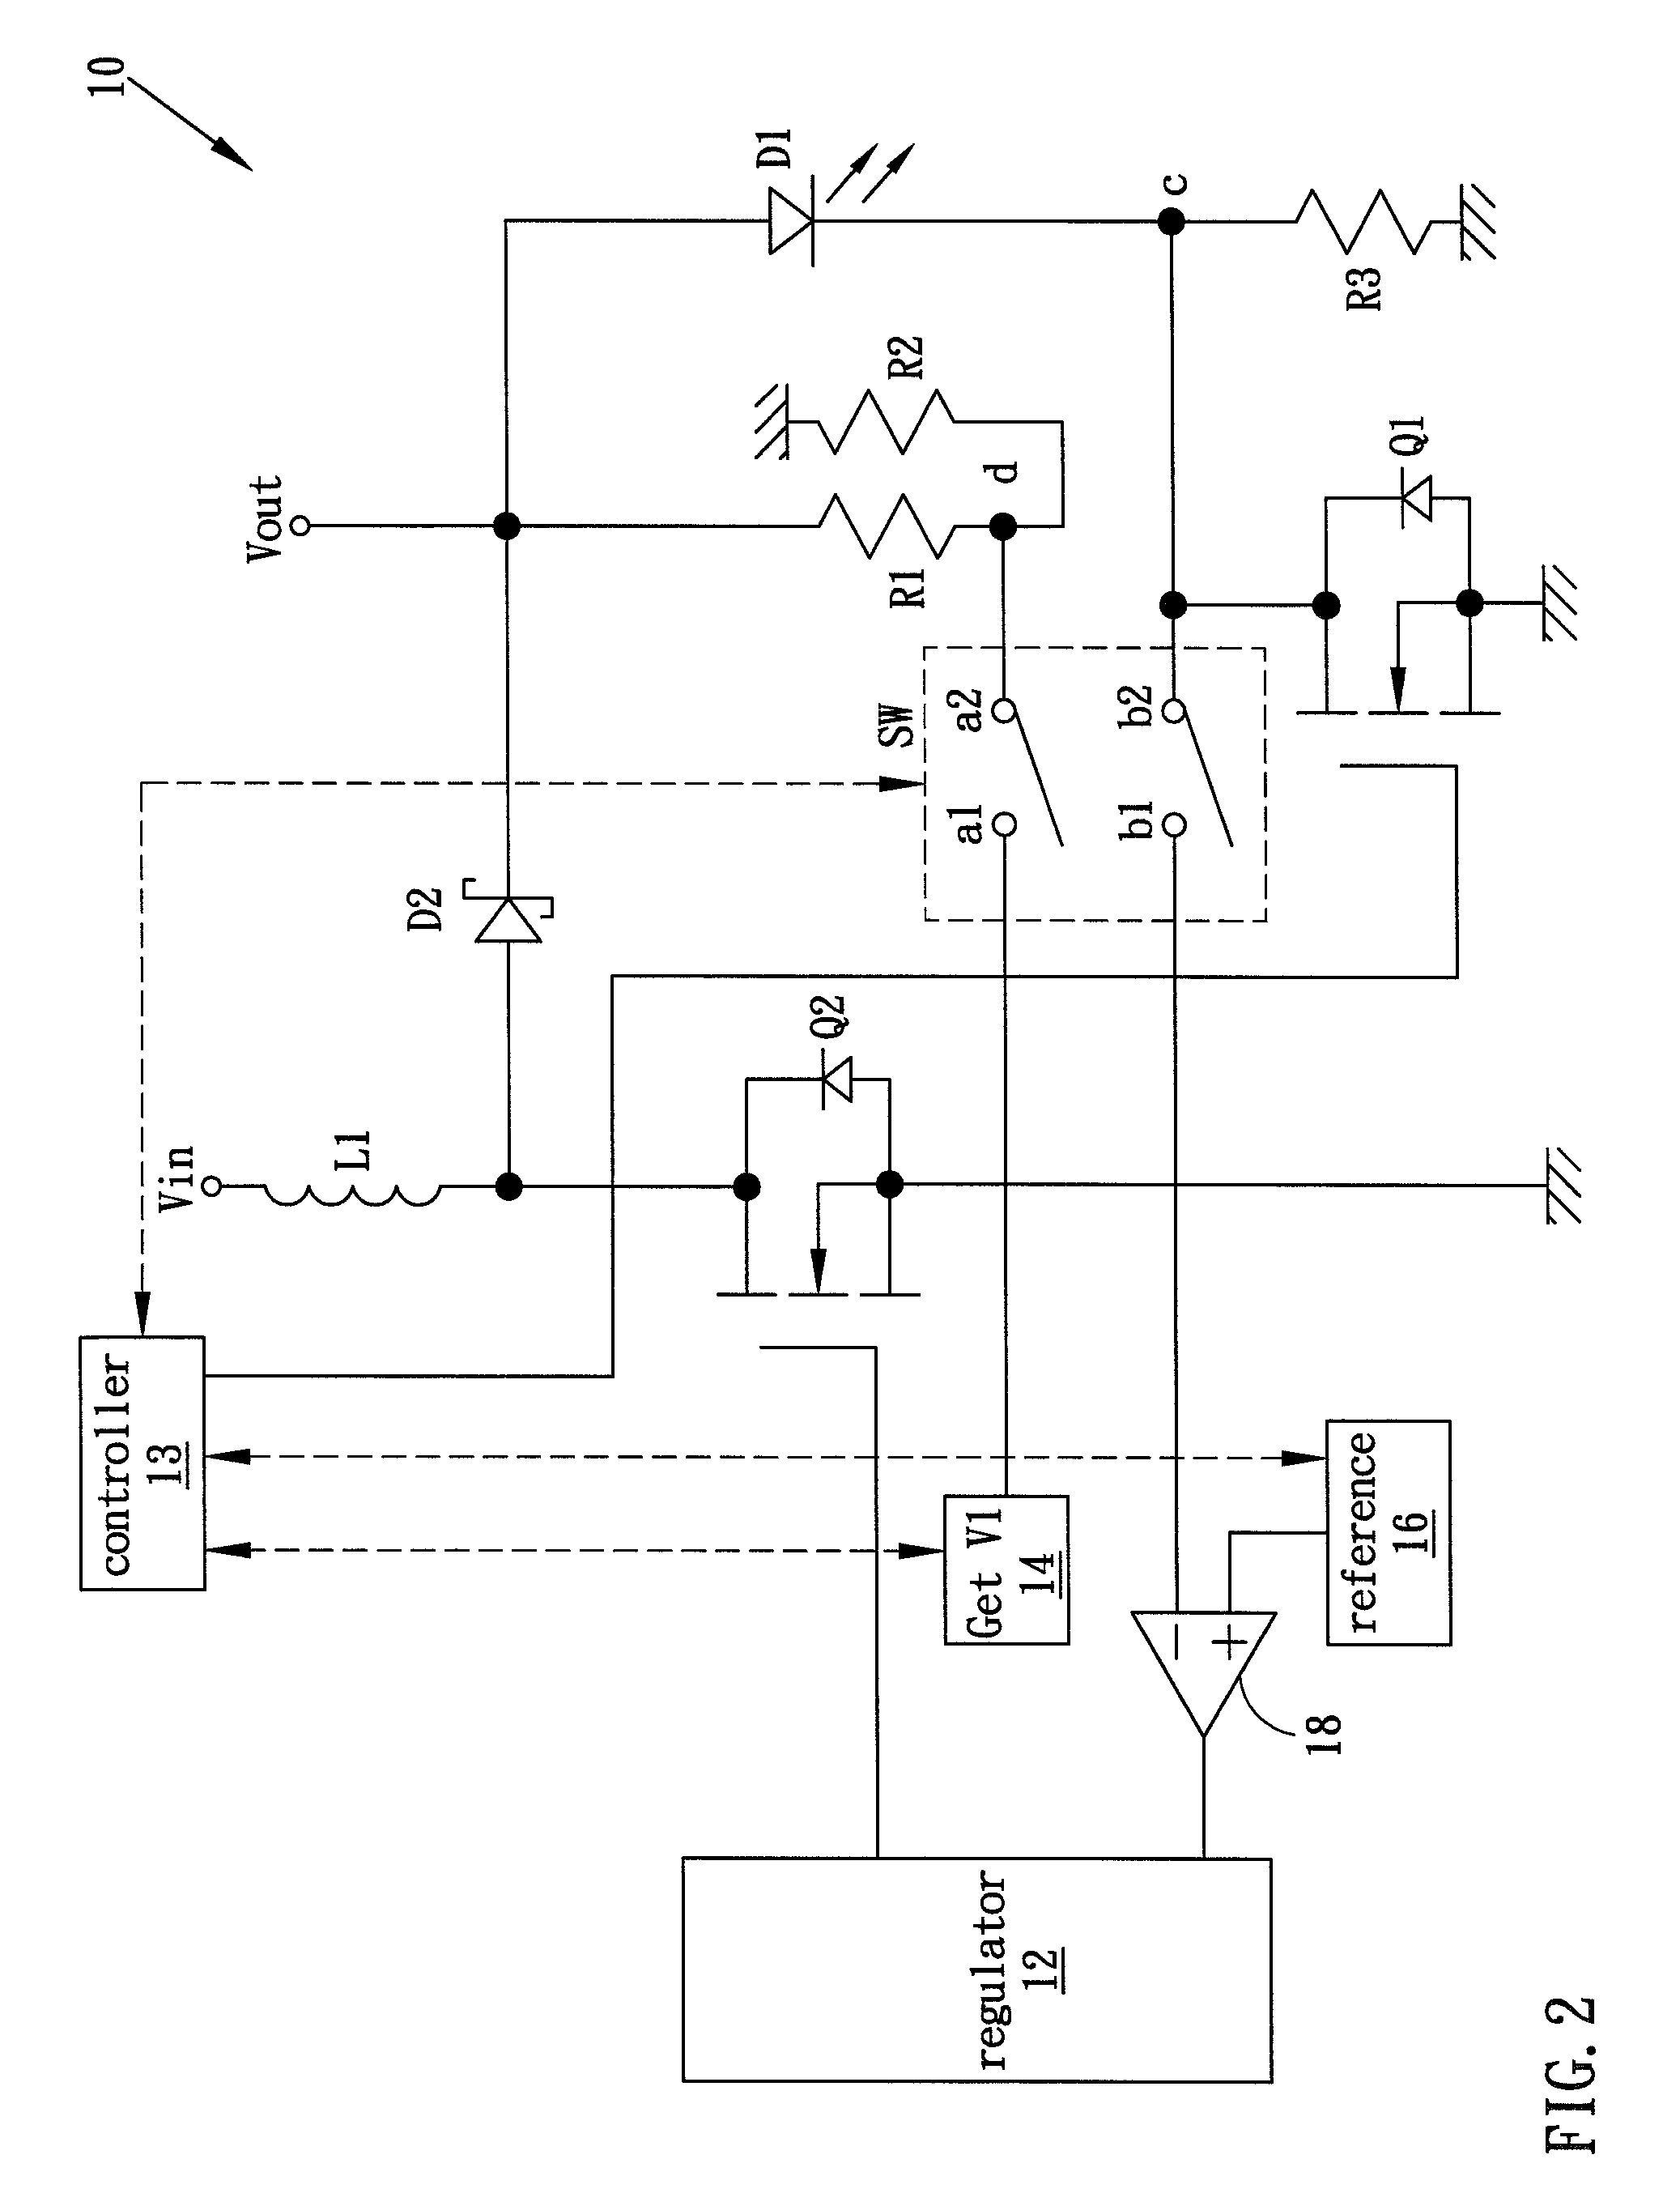 System and method for driving LED with high efficiency in power consumption